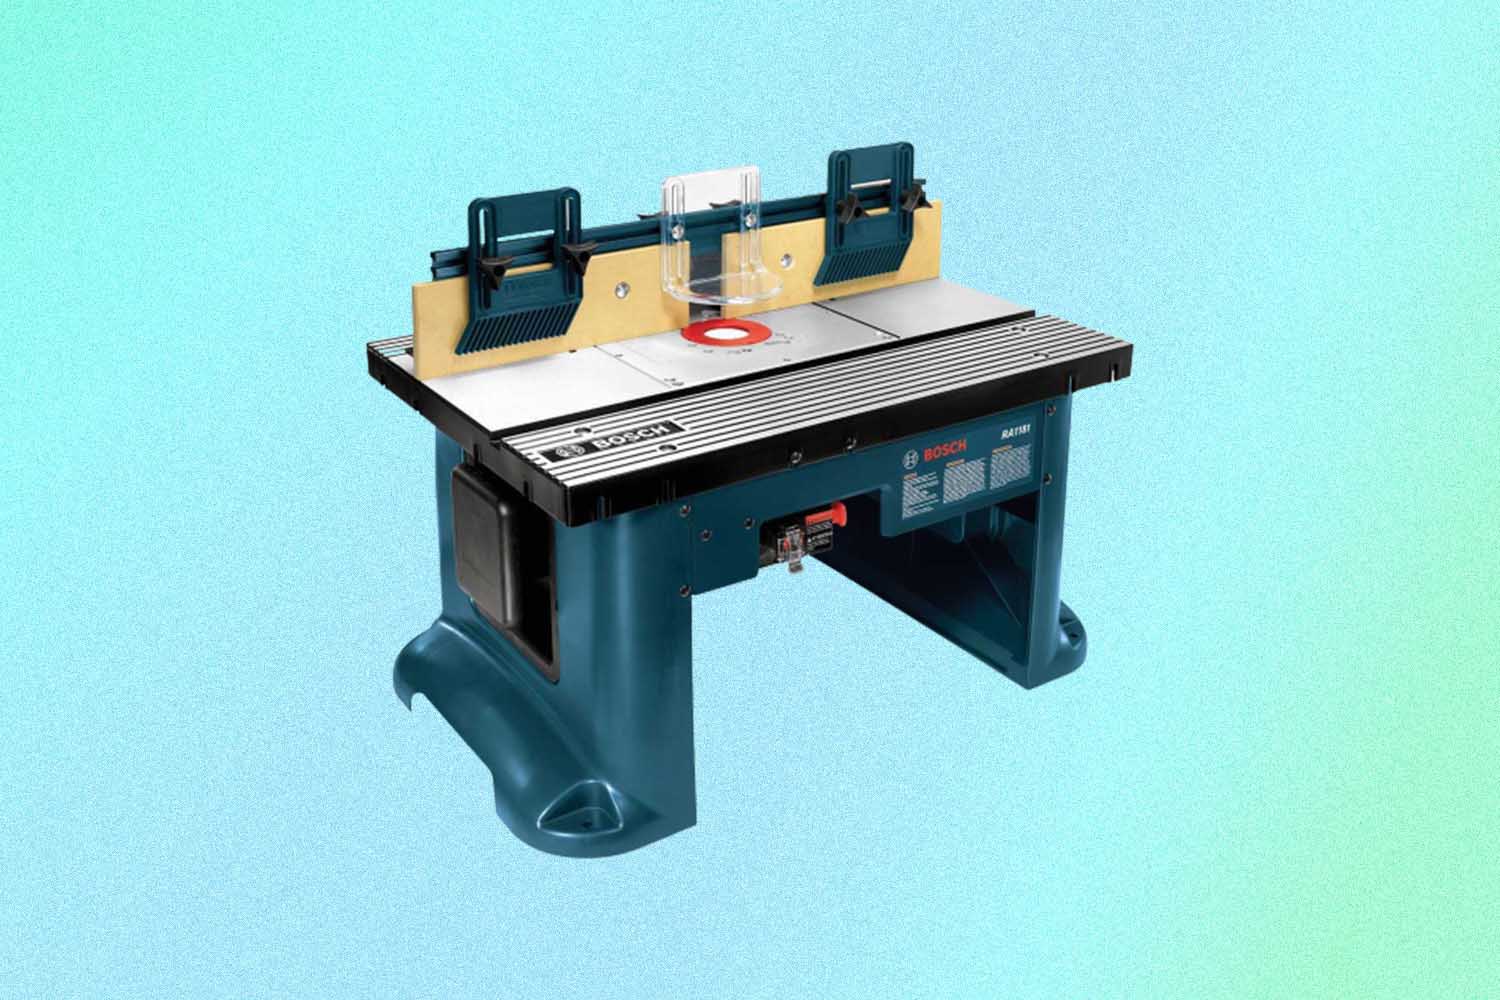 Bosch RA1181-RT Benchtop Router Table